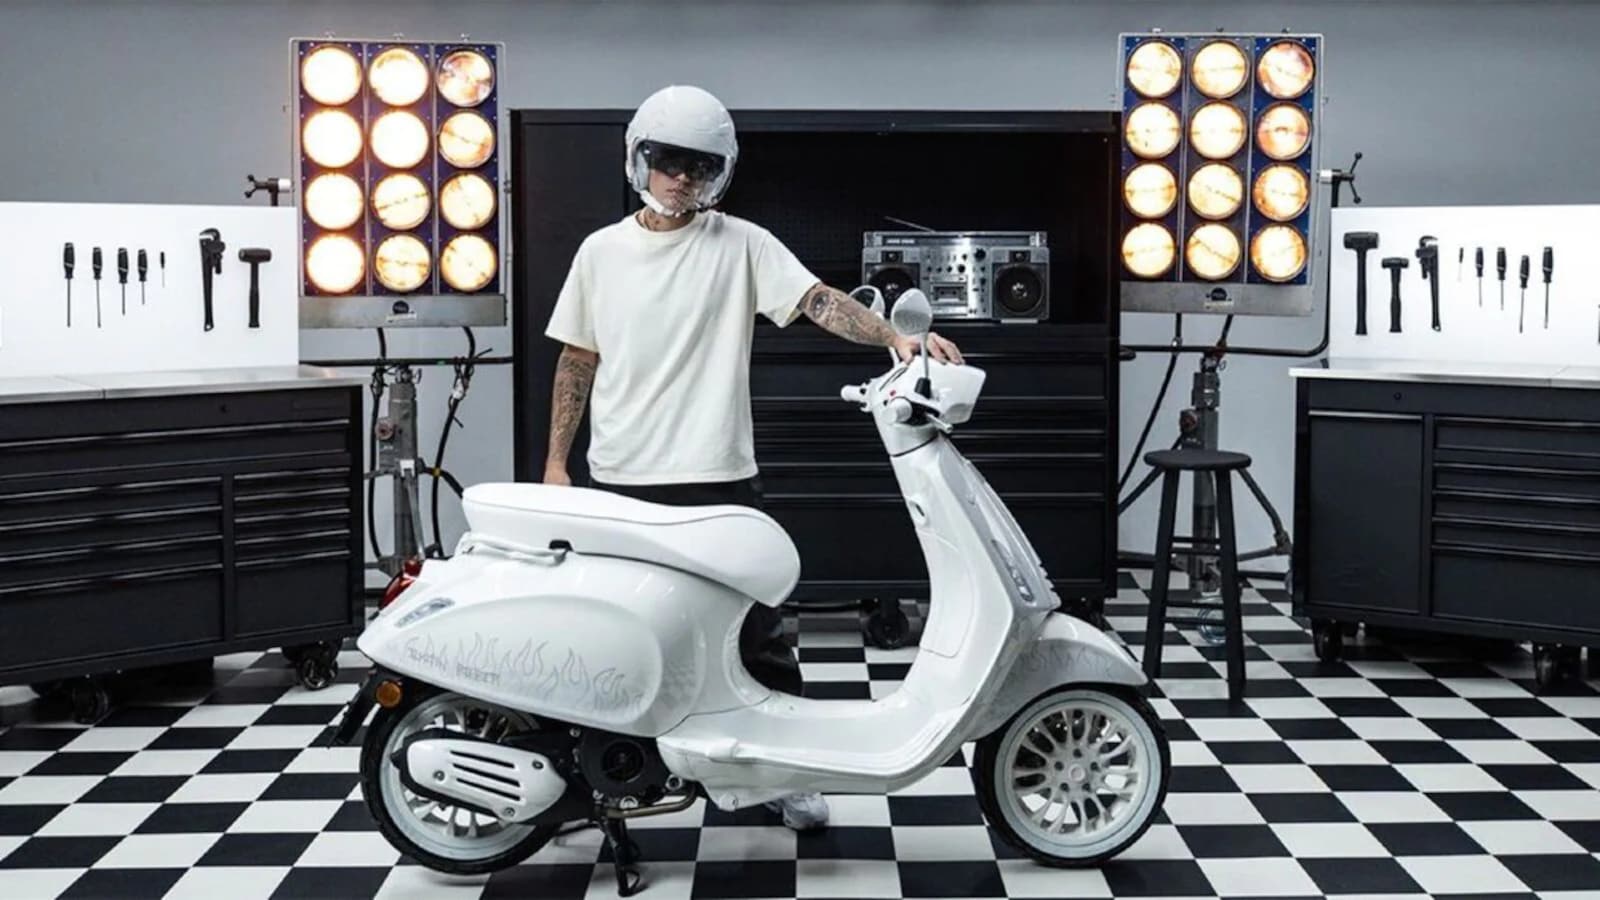 https://images.moneycontrol.com/static-mcnews/2022/07/Justin-beiber-and-vespa.jpg?impolicy=website&width=1600&height=900